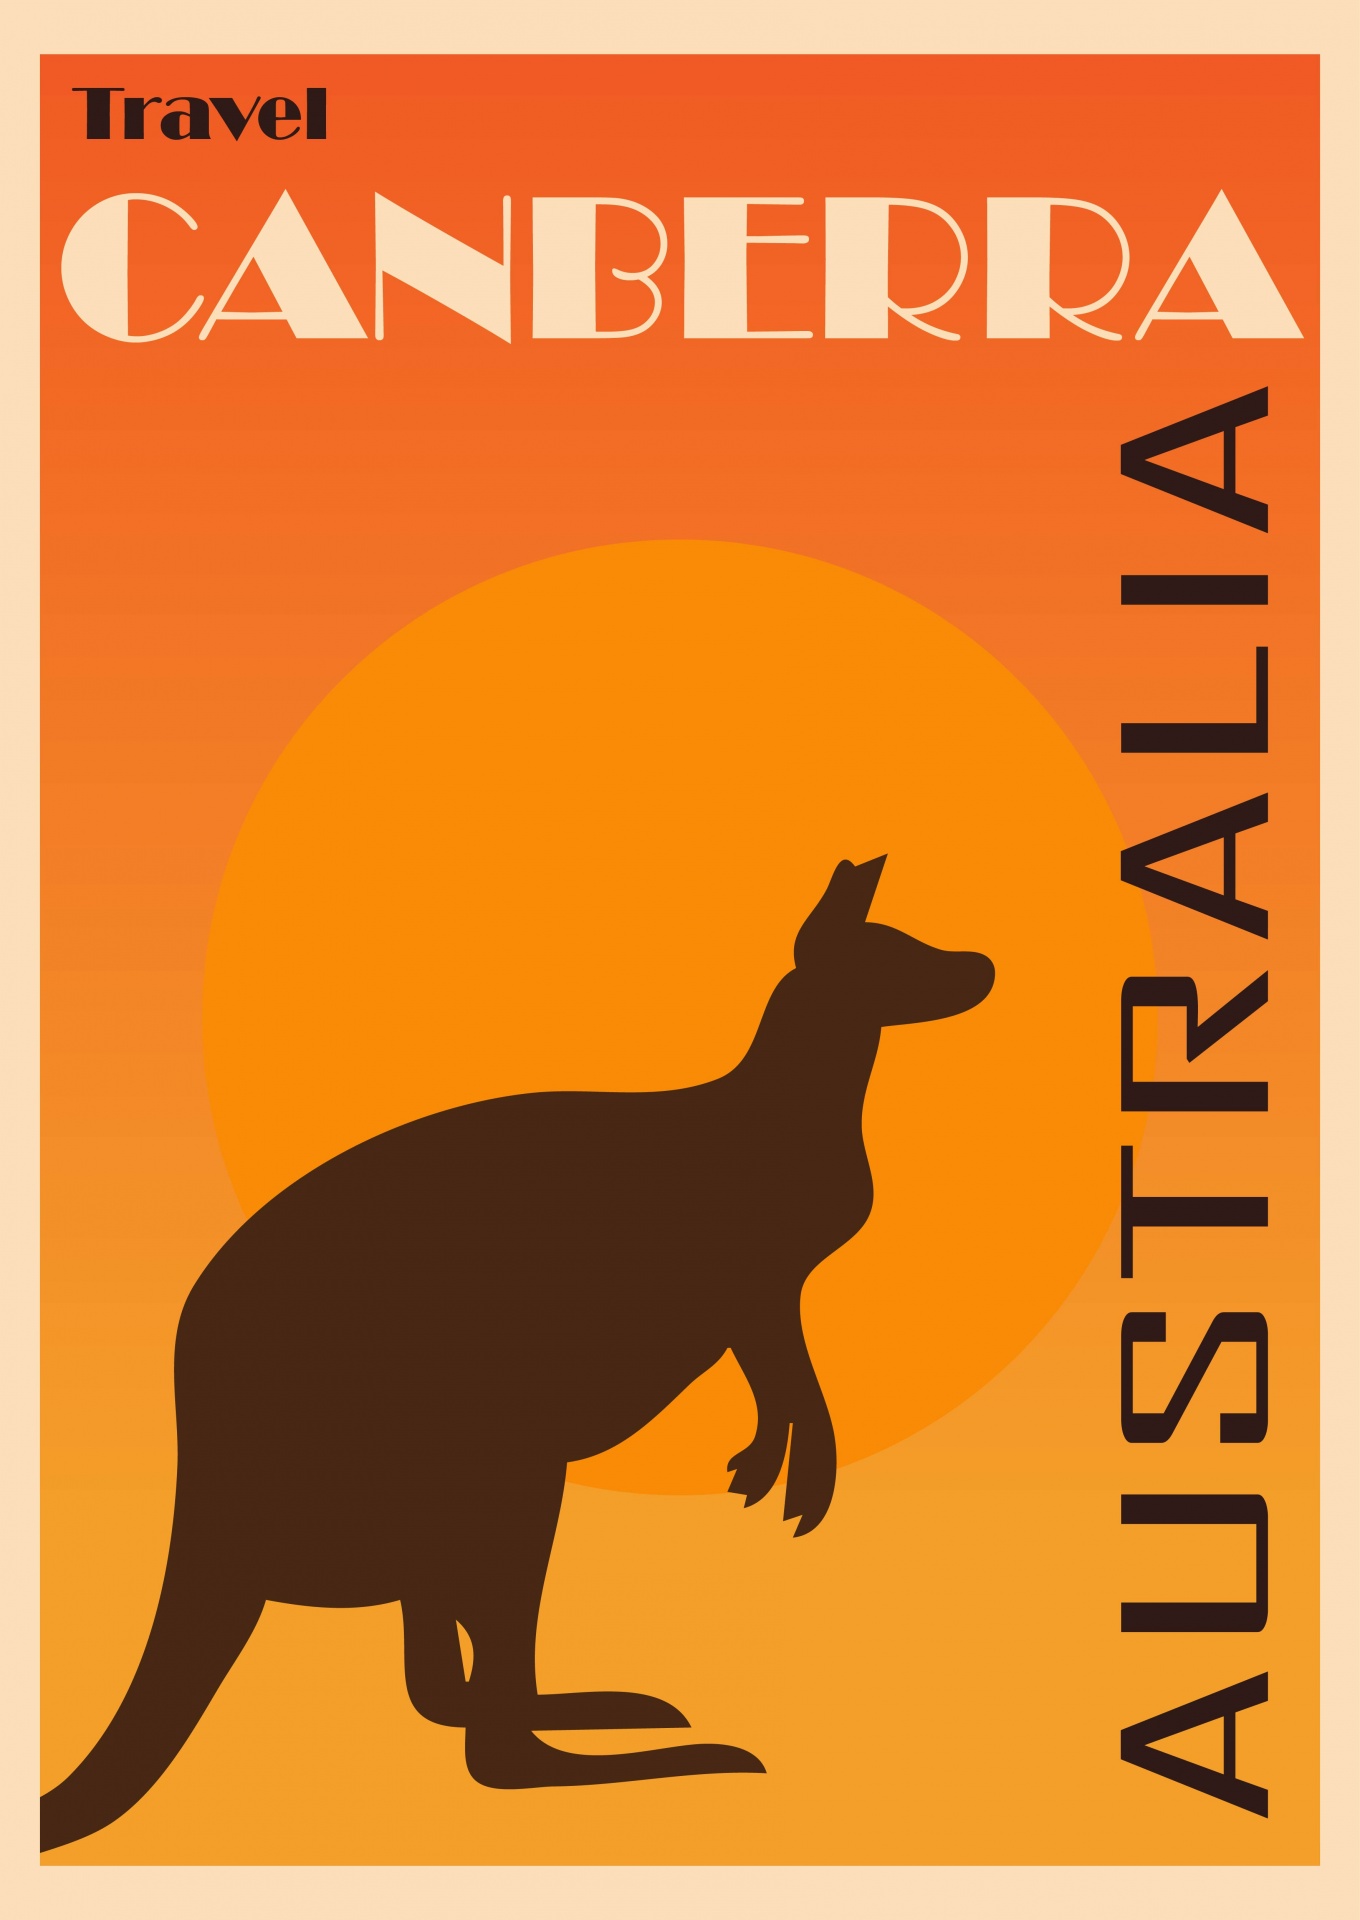 Retro, vintage style yet modern and fresh travel poster for Canberra, Australia with orange sunset and kangaroo silhouette